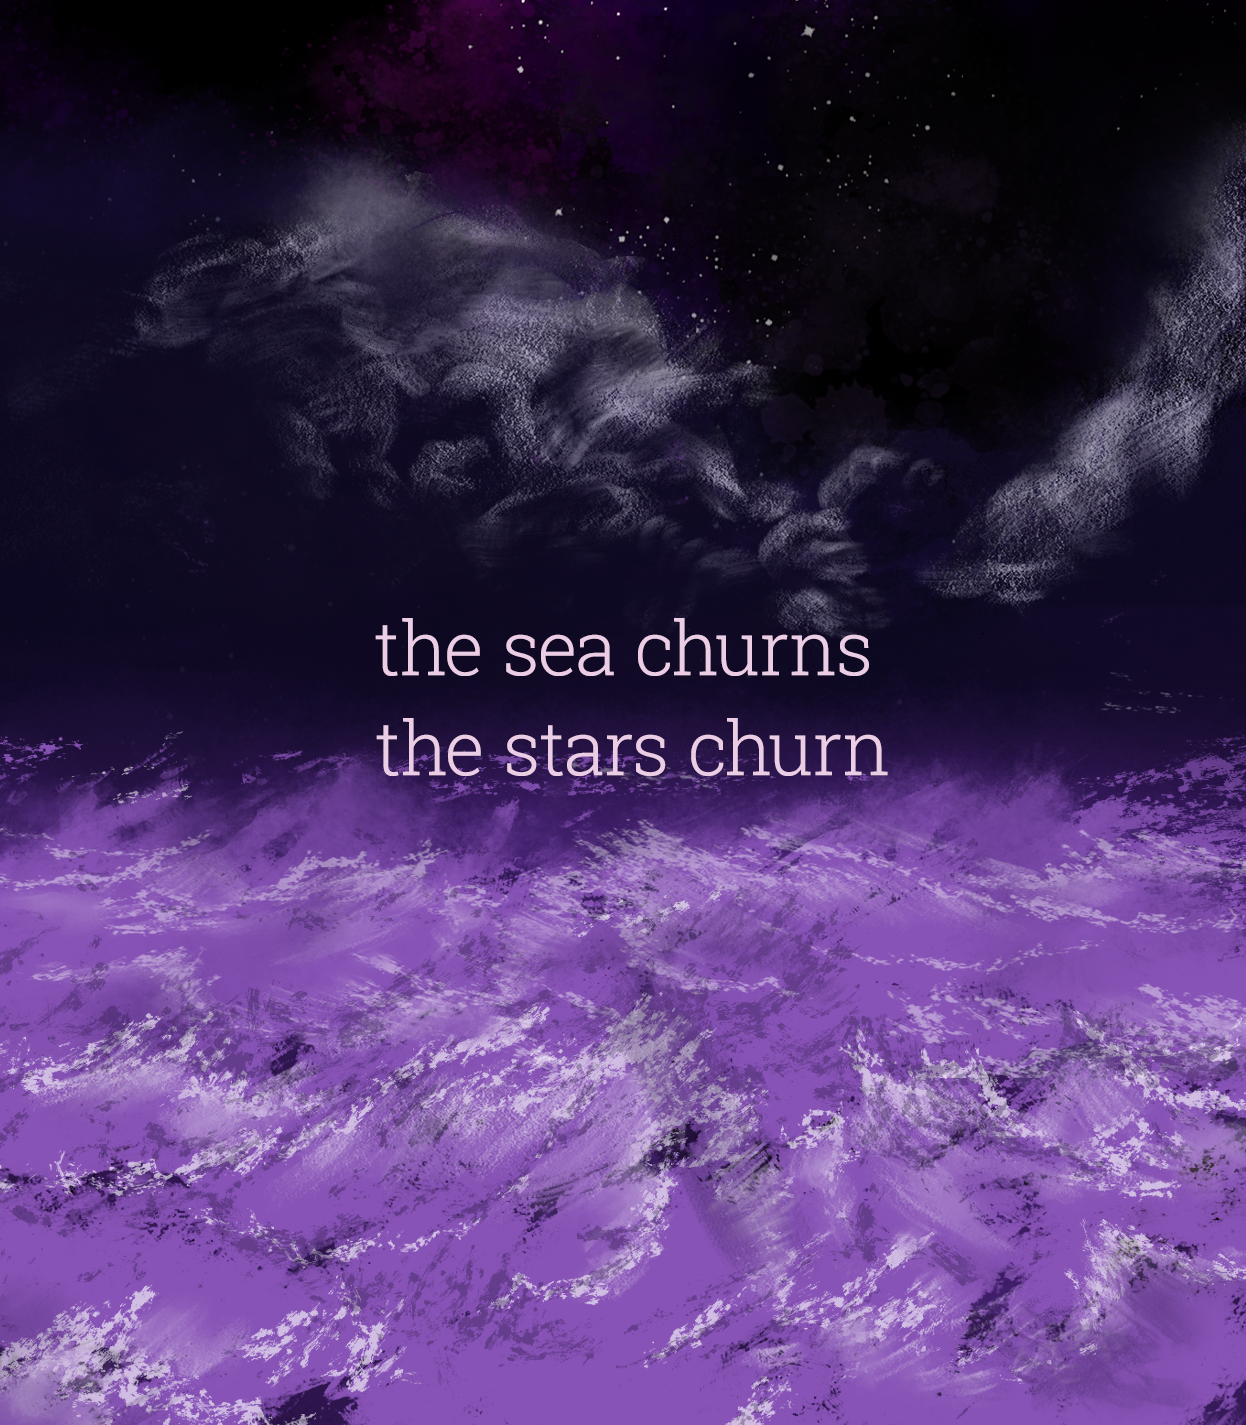 The sea churns. The stars churn. A violet ocean foregrounds violent storm clouds, and above it all, the stars shine.